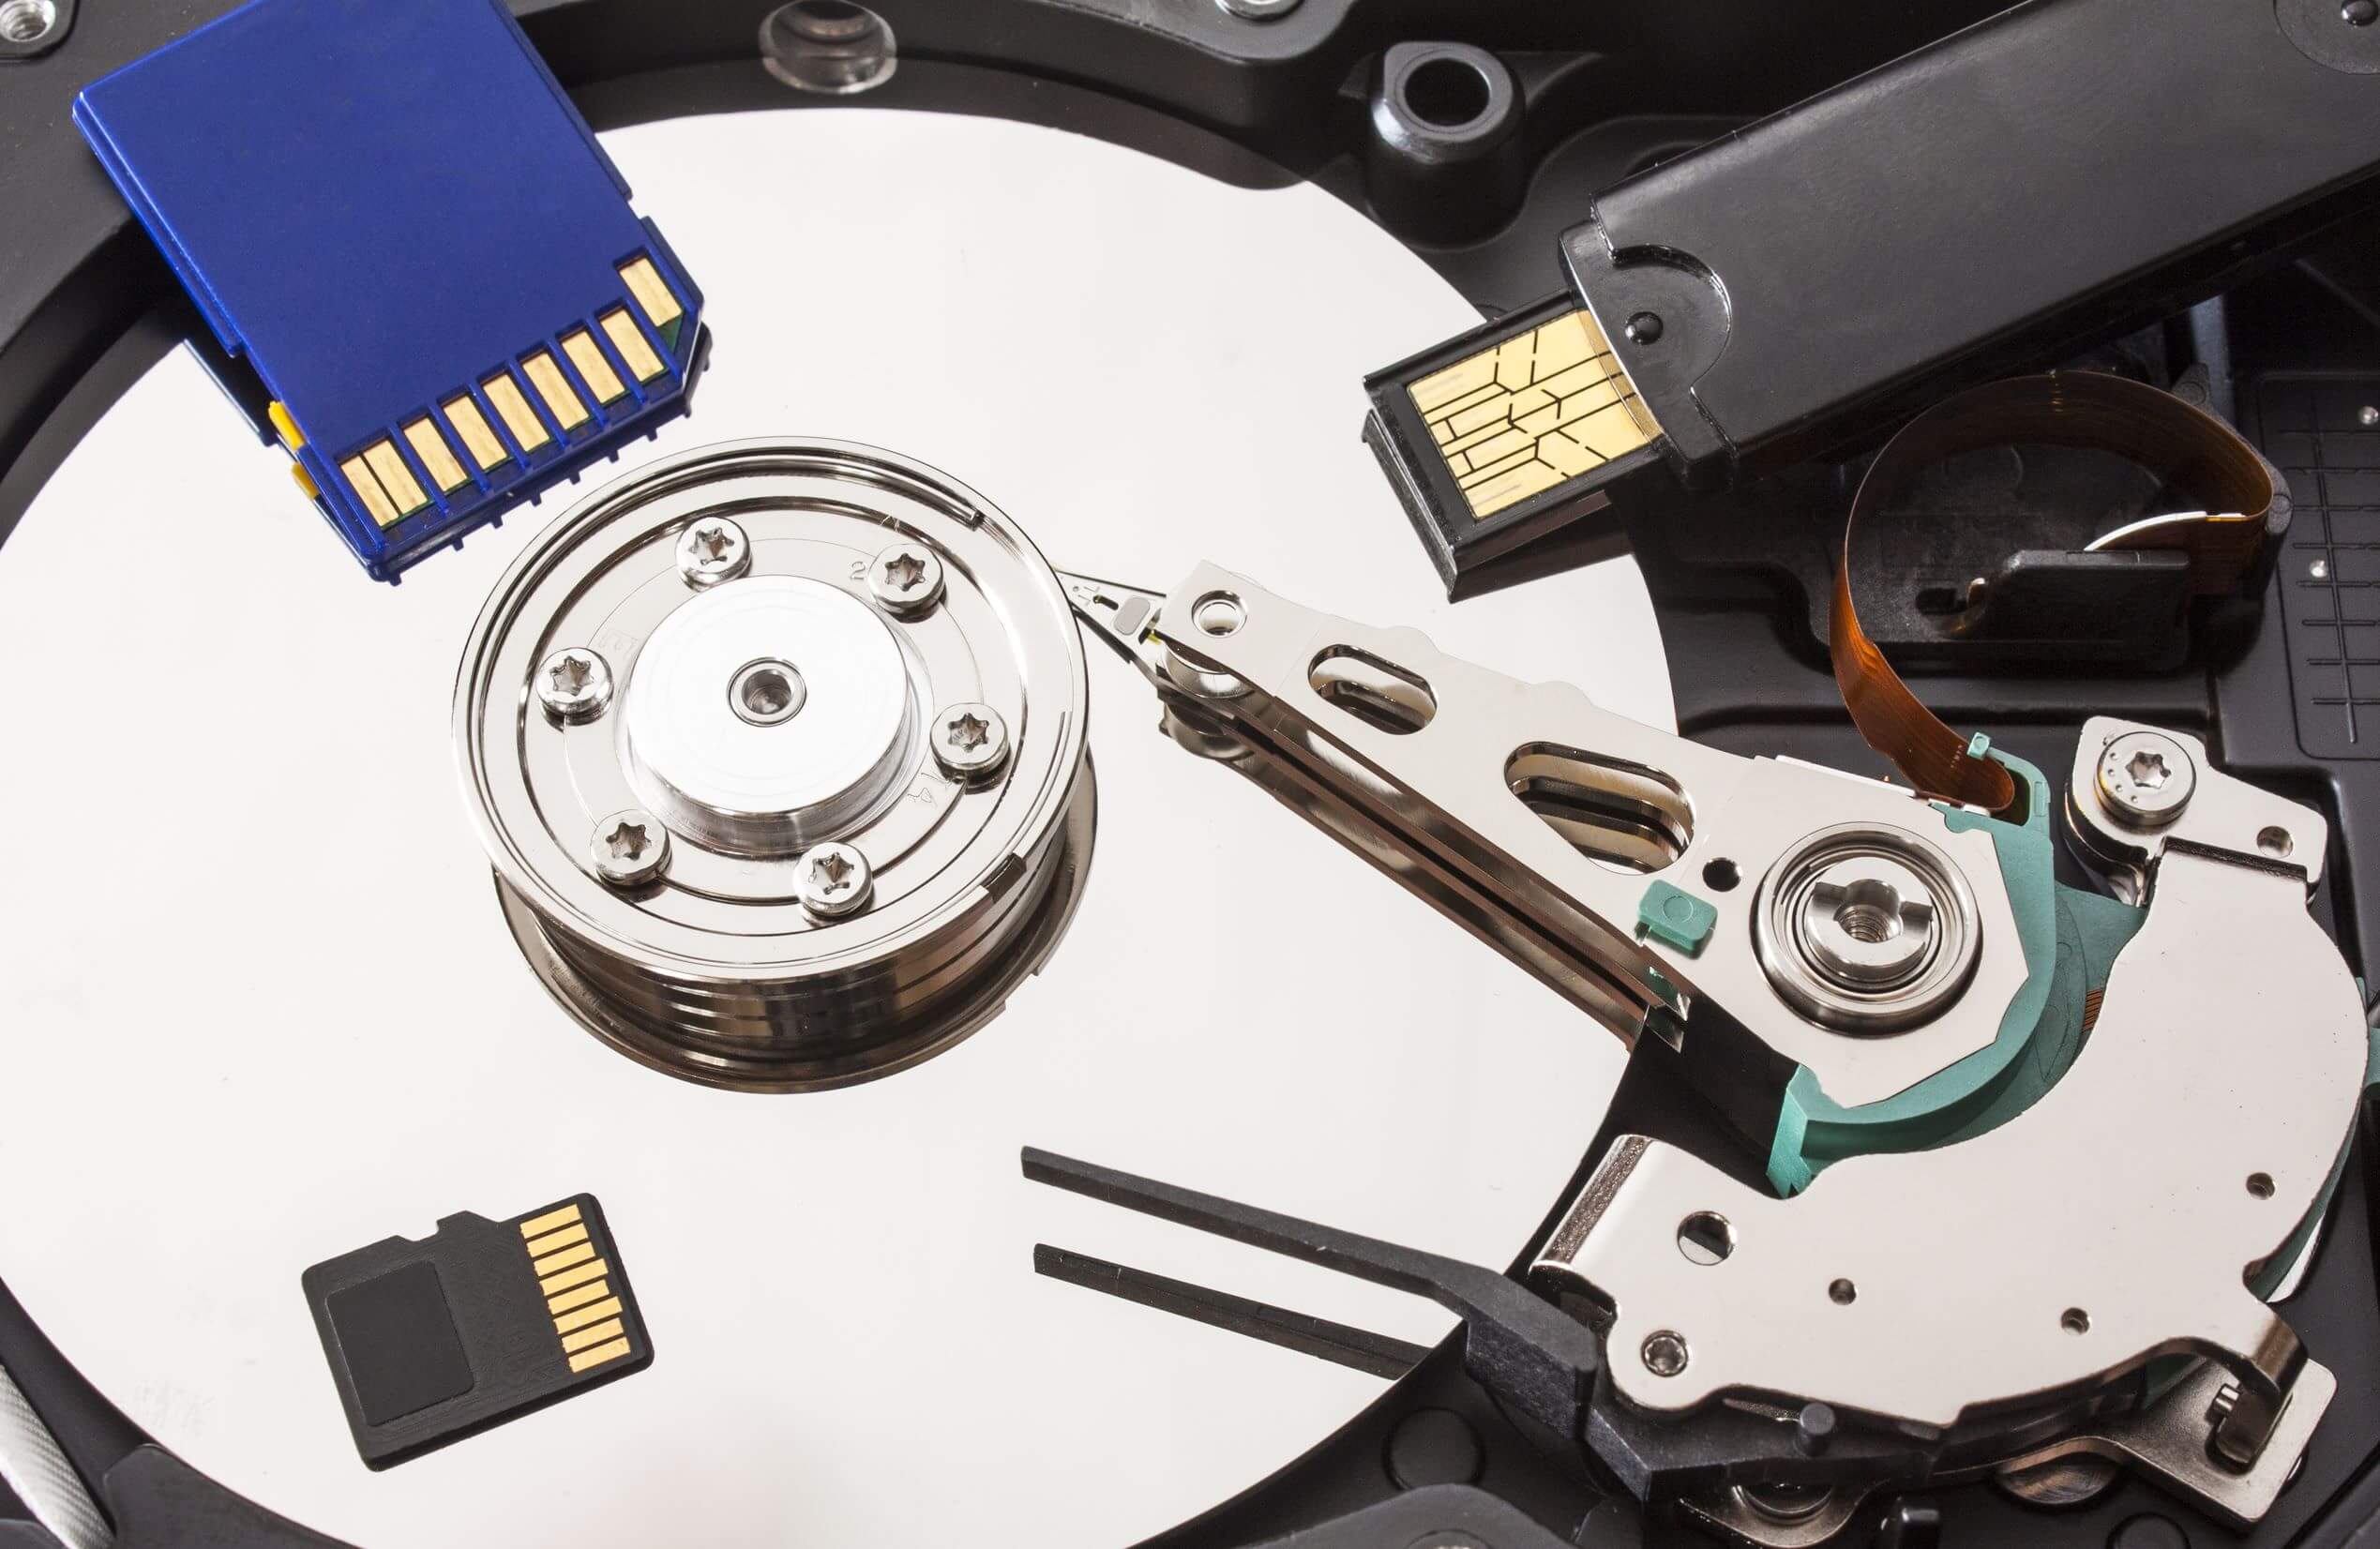 How To Data Recovery Services From A Formatted Hard Drive?